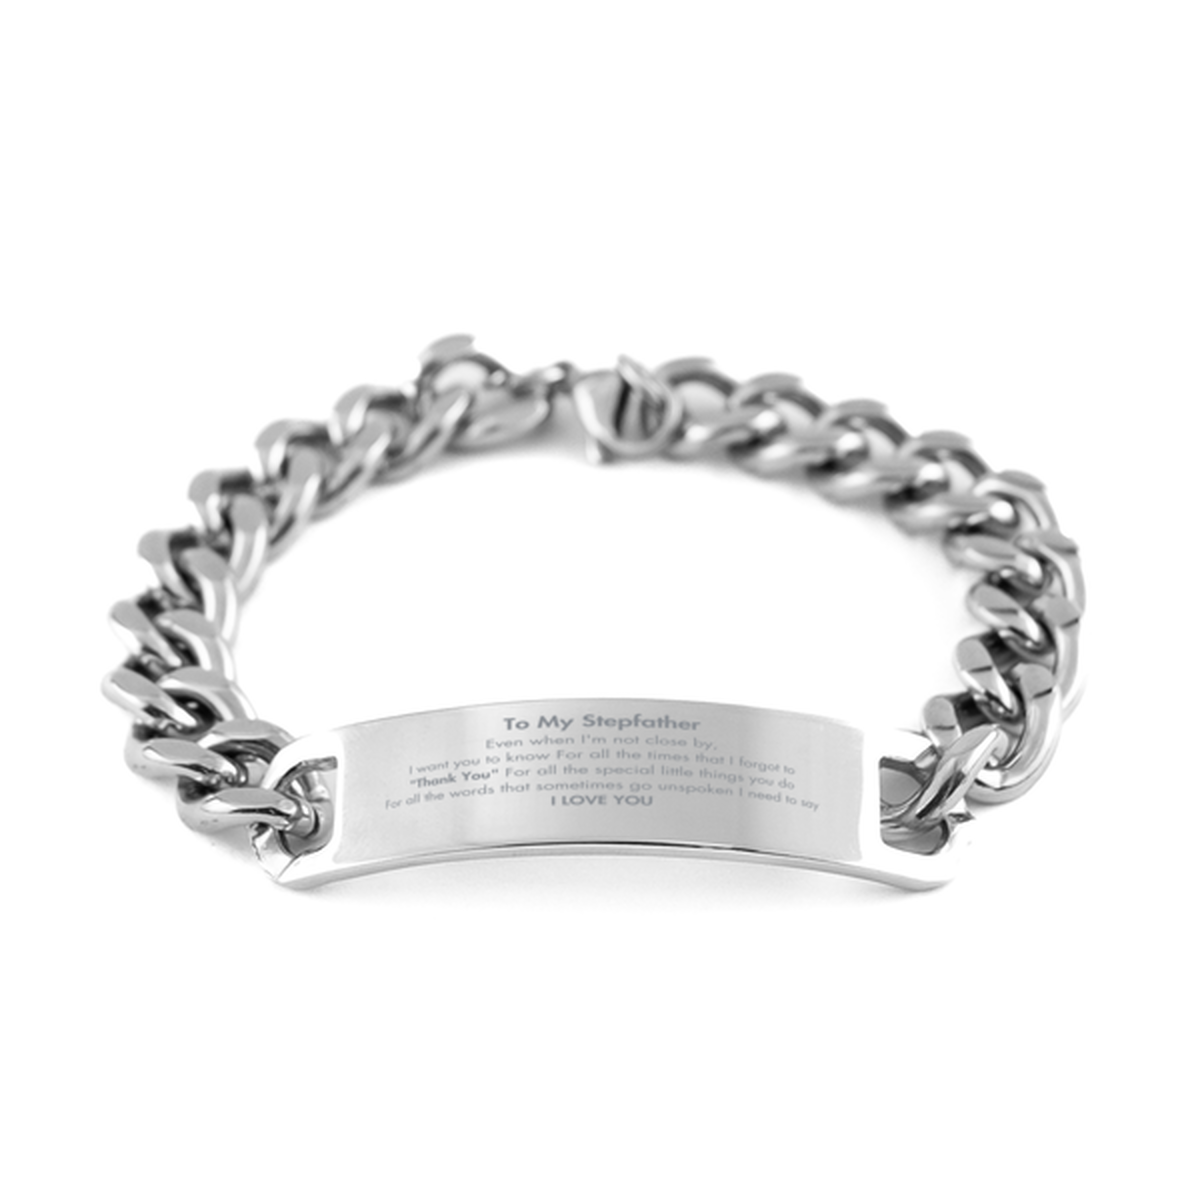 Thank You Gifts for Stepfather, Keepsake Cuban Chain Stainless Steel Bracelet Gifts for Stepfather Birthday Mother's day Father's Day Stepfather For all the words That sometimes go unspoken I need to say I LOVE YOU